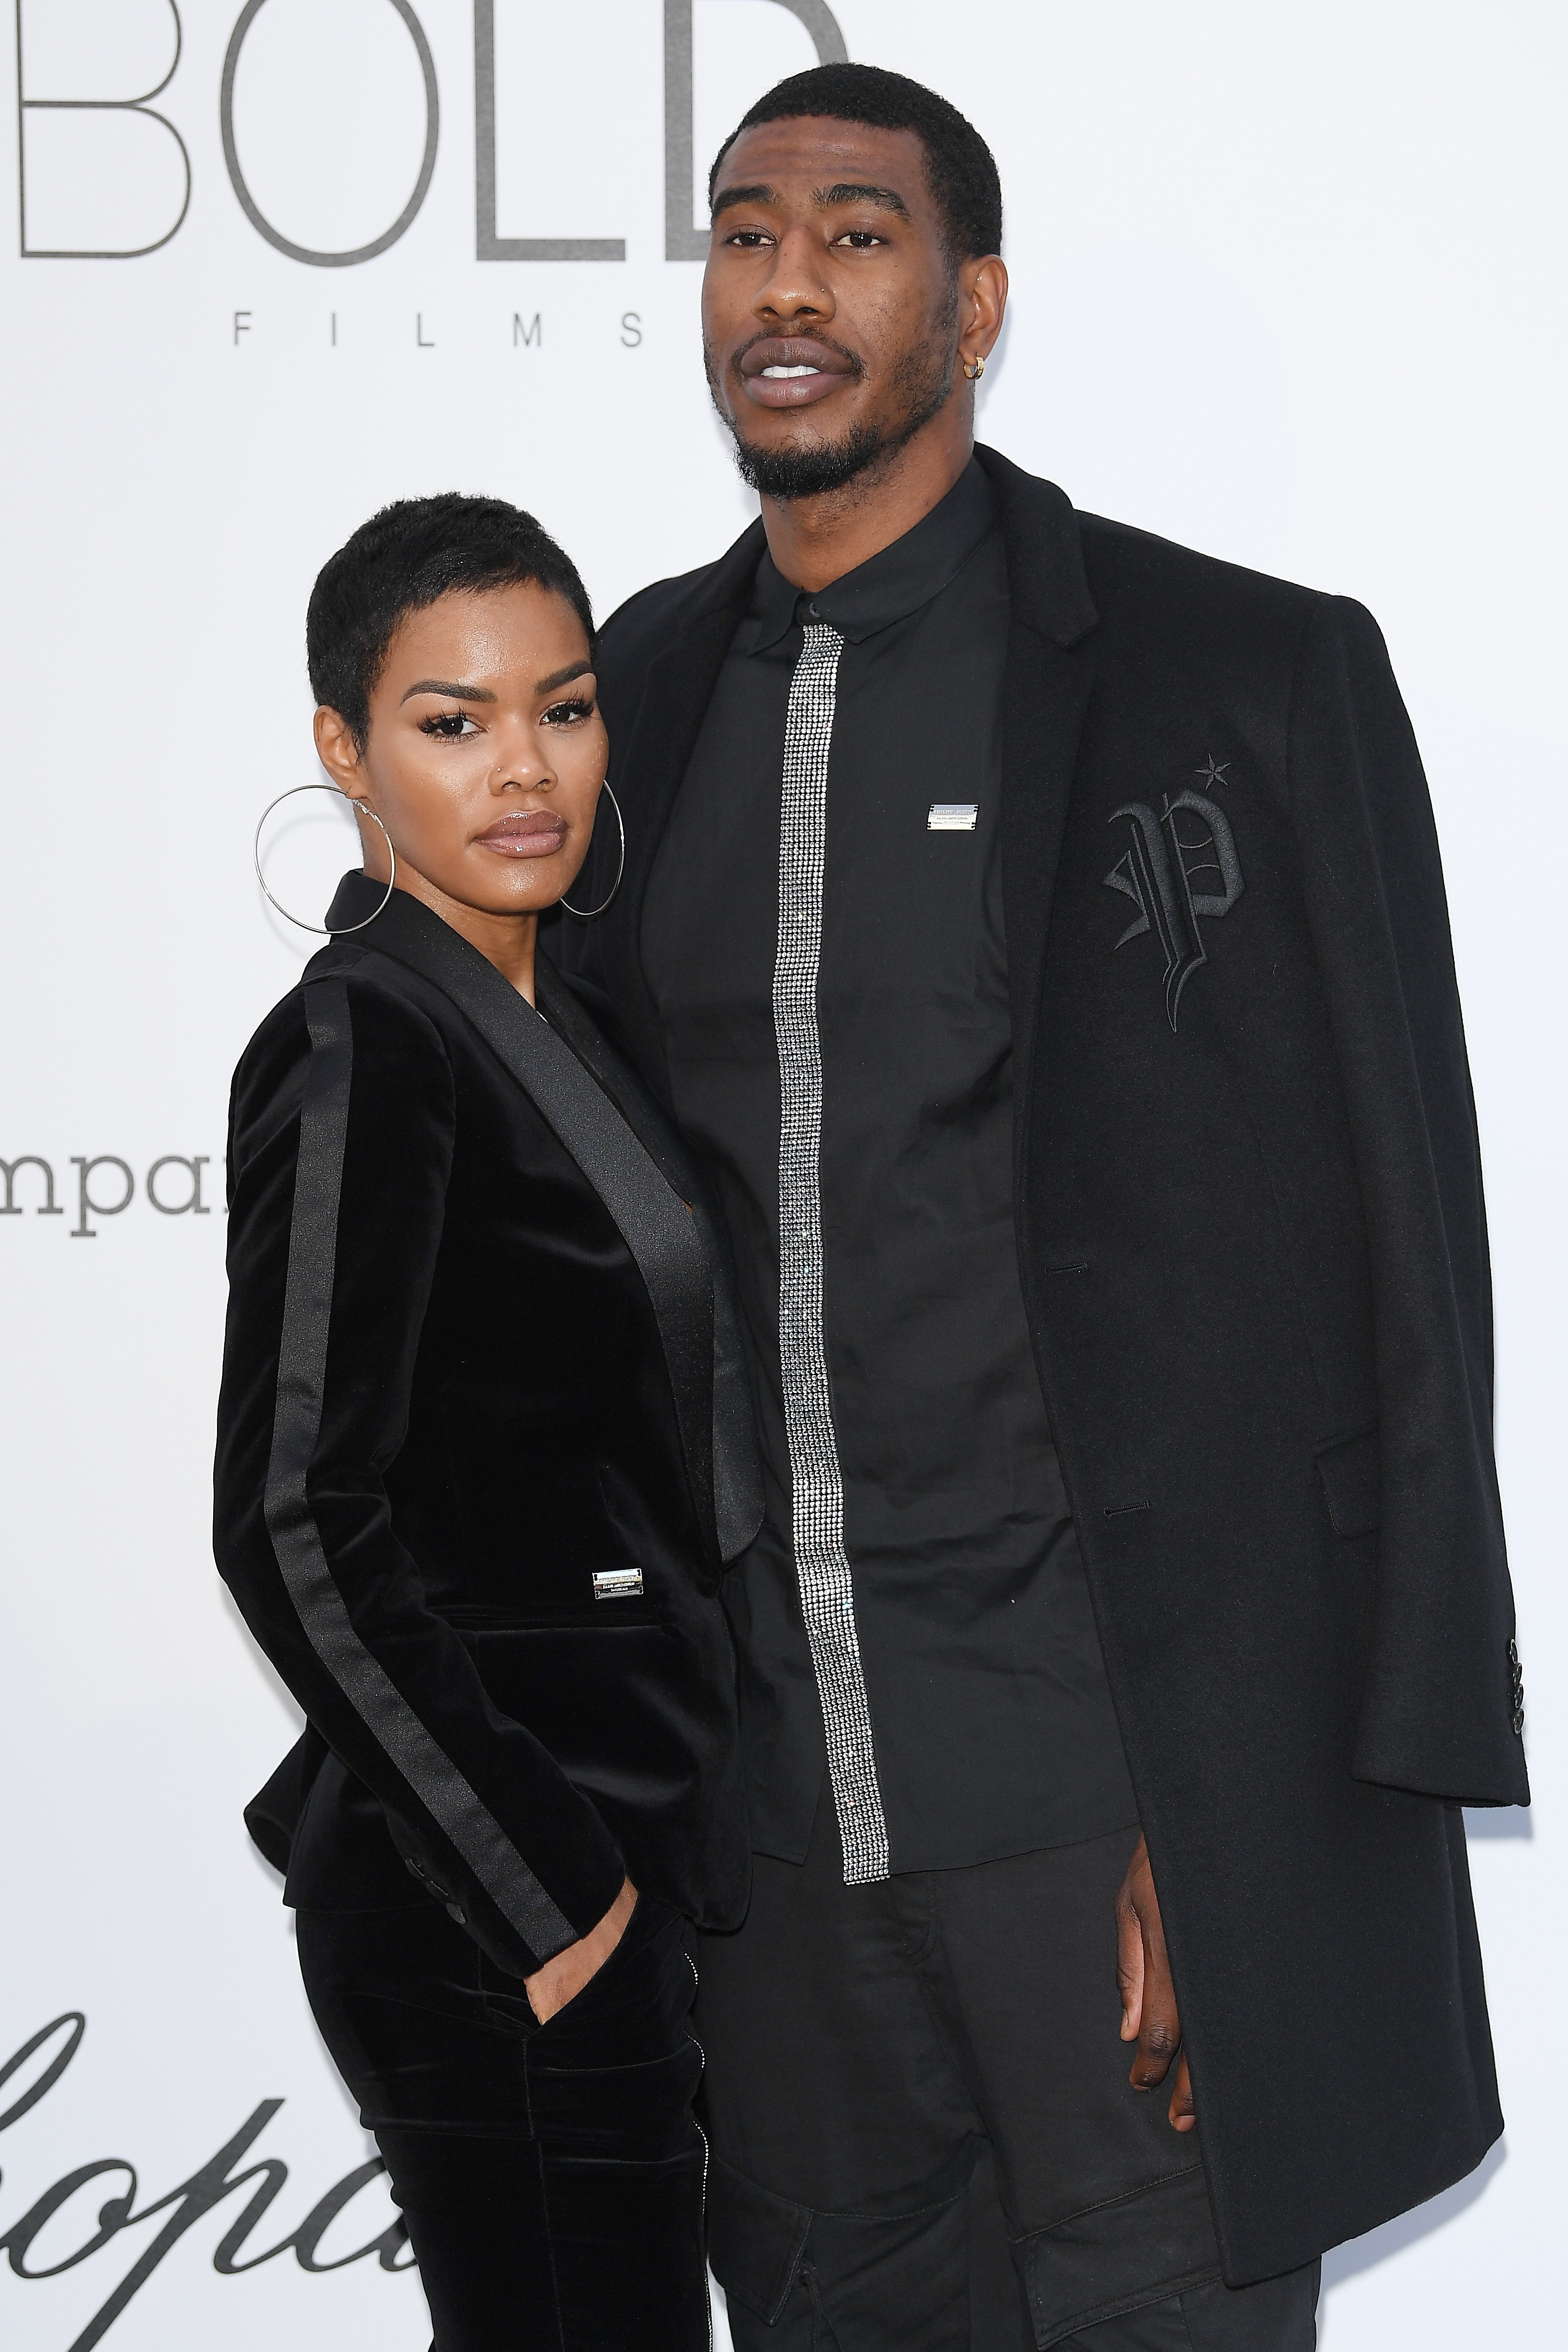 Teyana Taylor and Iman Shumpert at Hotel du Cap-Eden-Roc on May 17, 2018 in Cap d'Antibes, France | Photo: Getty Images